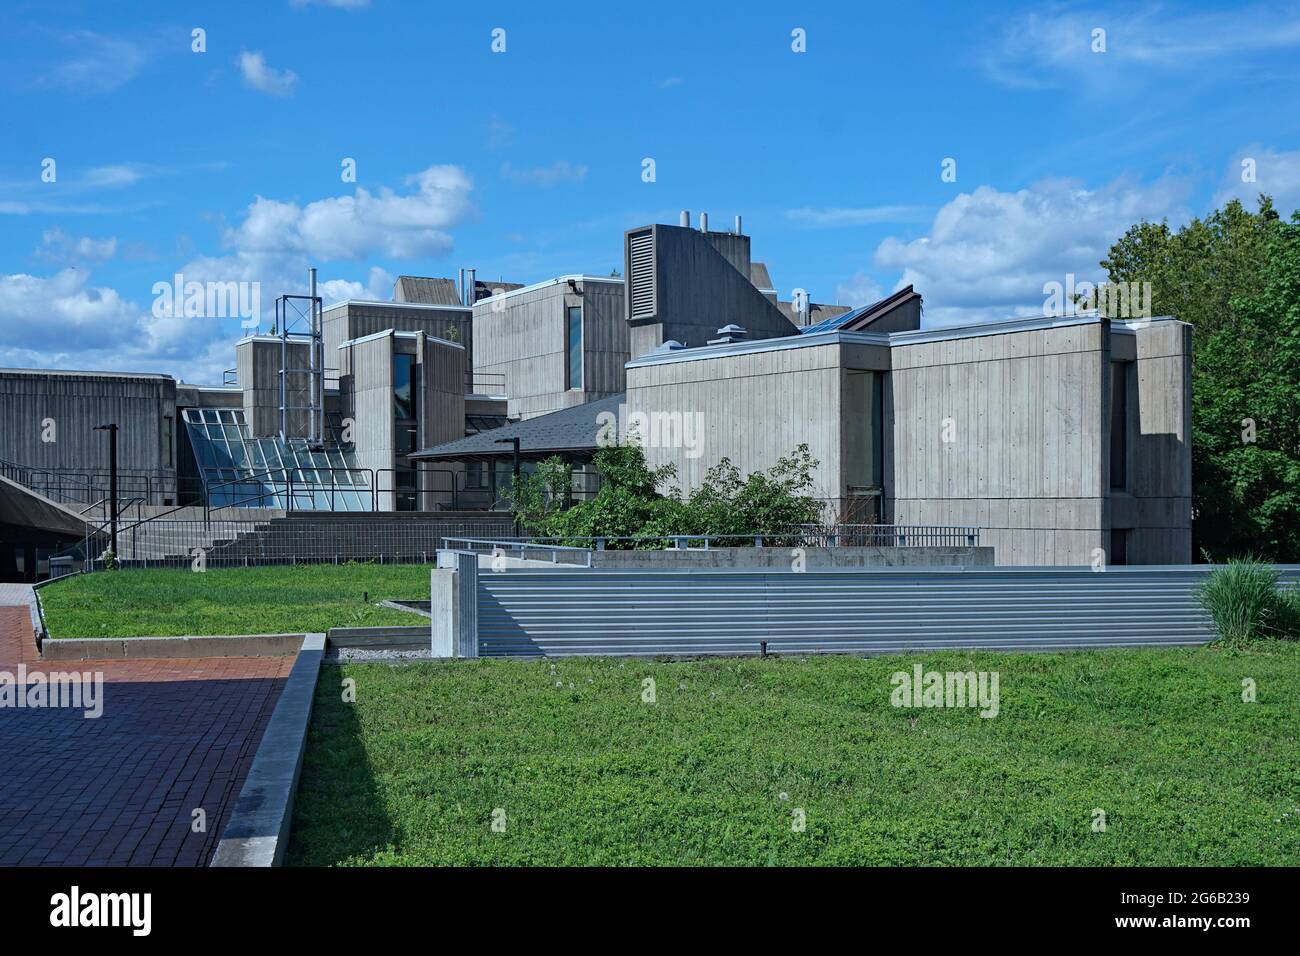 Trent University is a small city liberal arts university with modern architecture in a scenic riverside location. Stock Photo